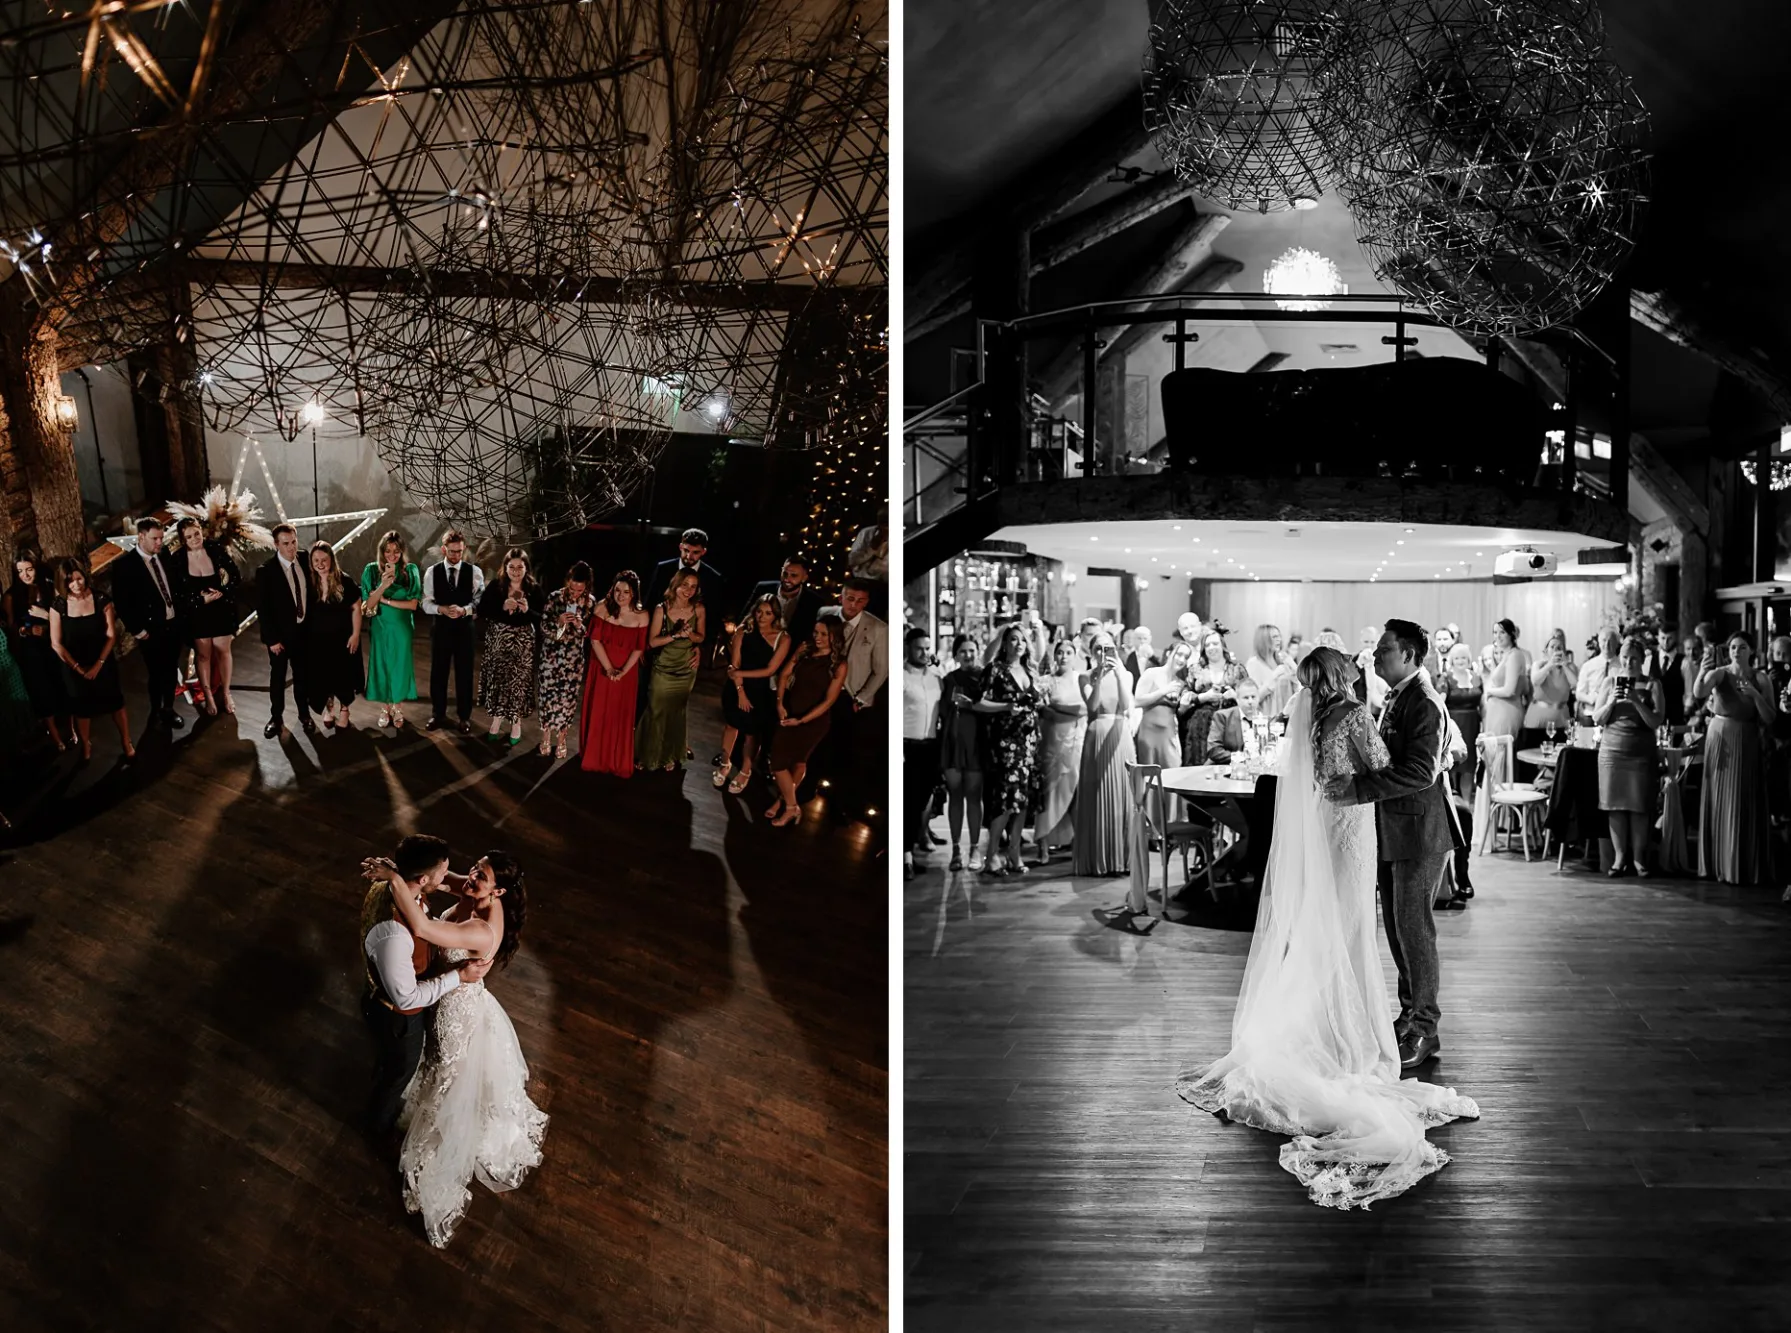 The first photo shows a bride and groom dancing with all wedding guests gathered around them. The photo is taken from above. The second photo is a bride and groom having their first dance on the dancefloor at Oaklands.